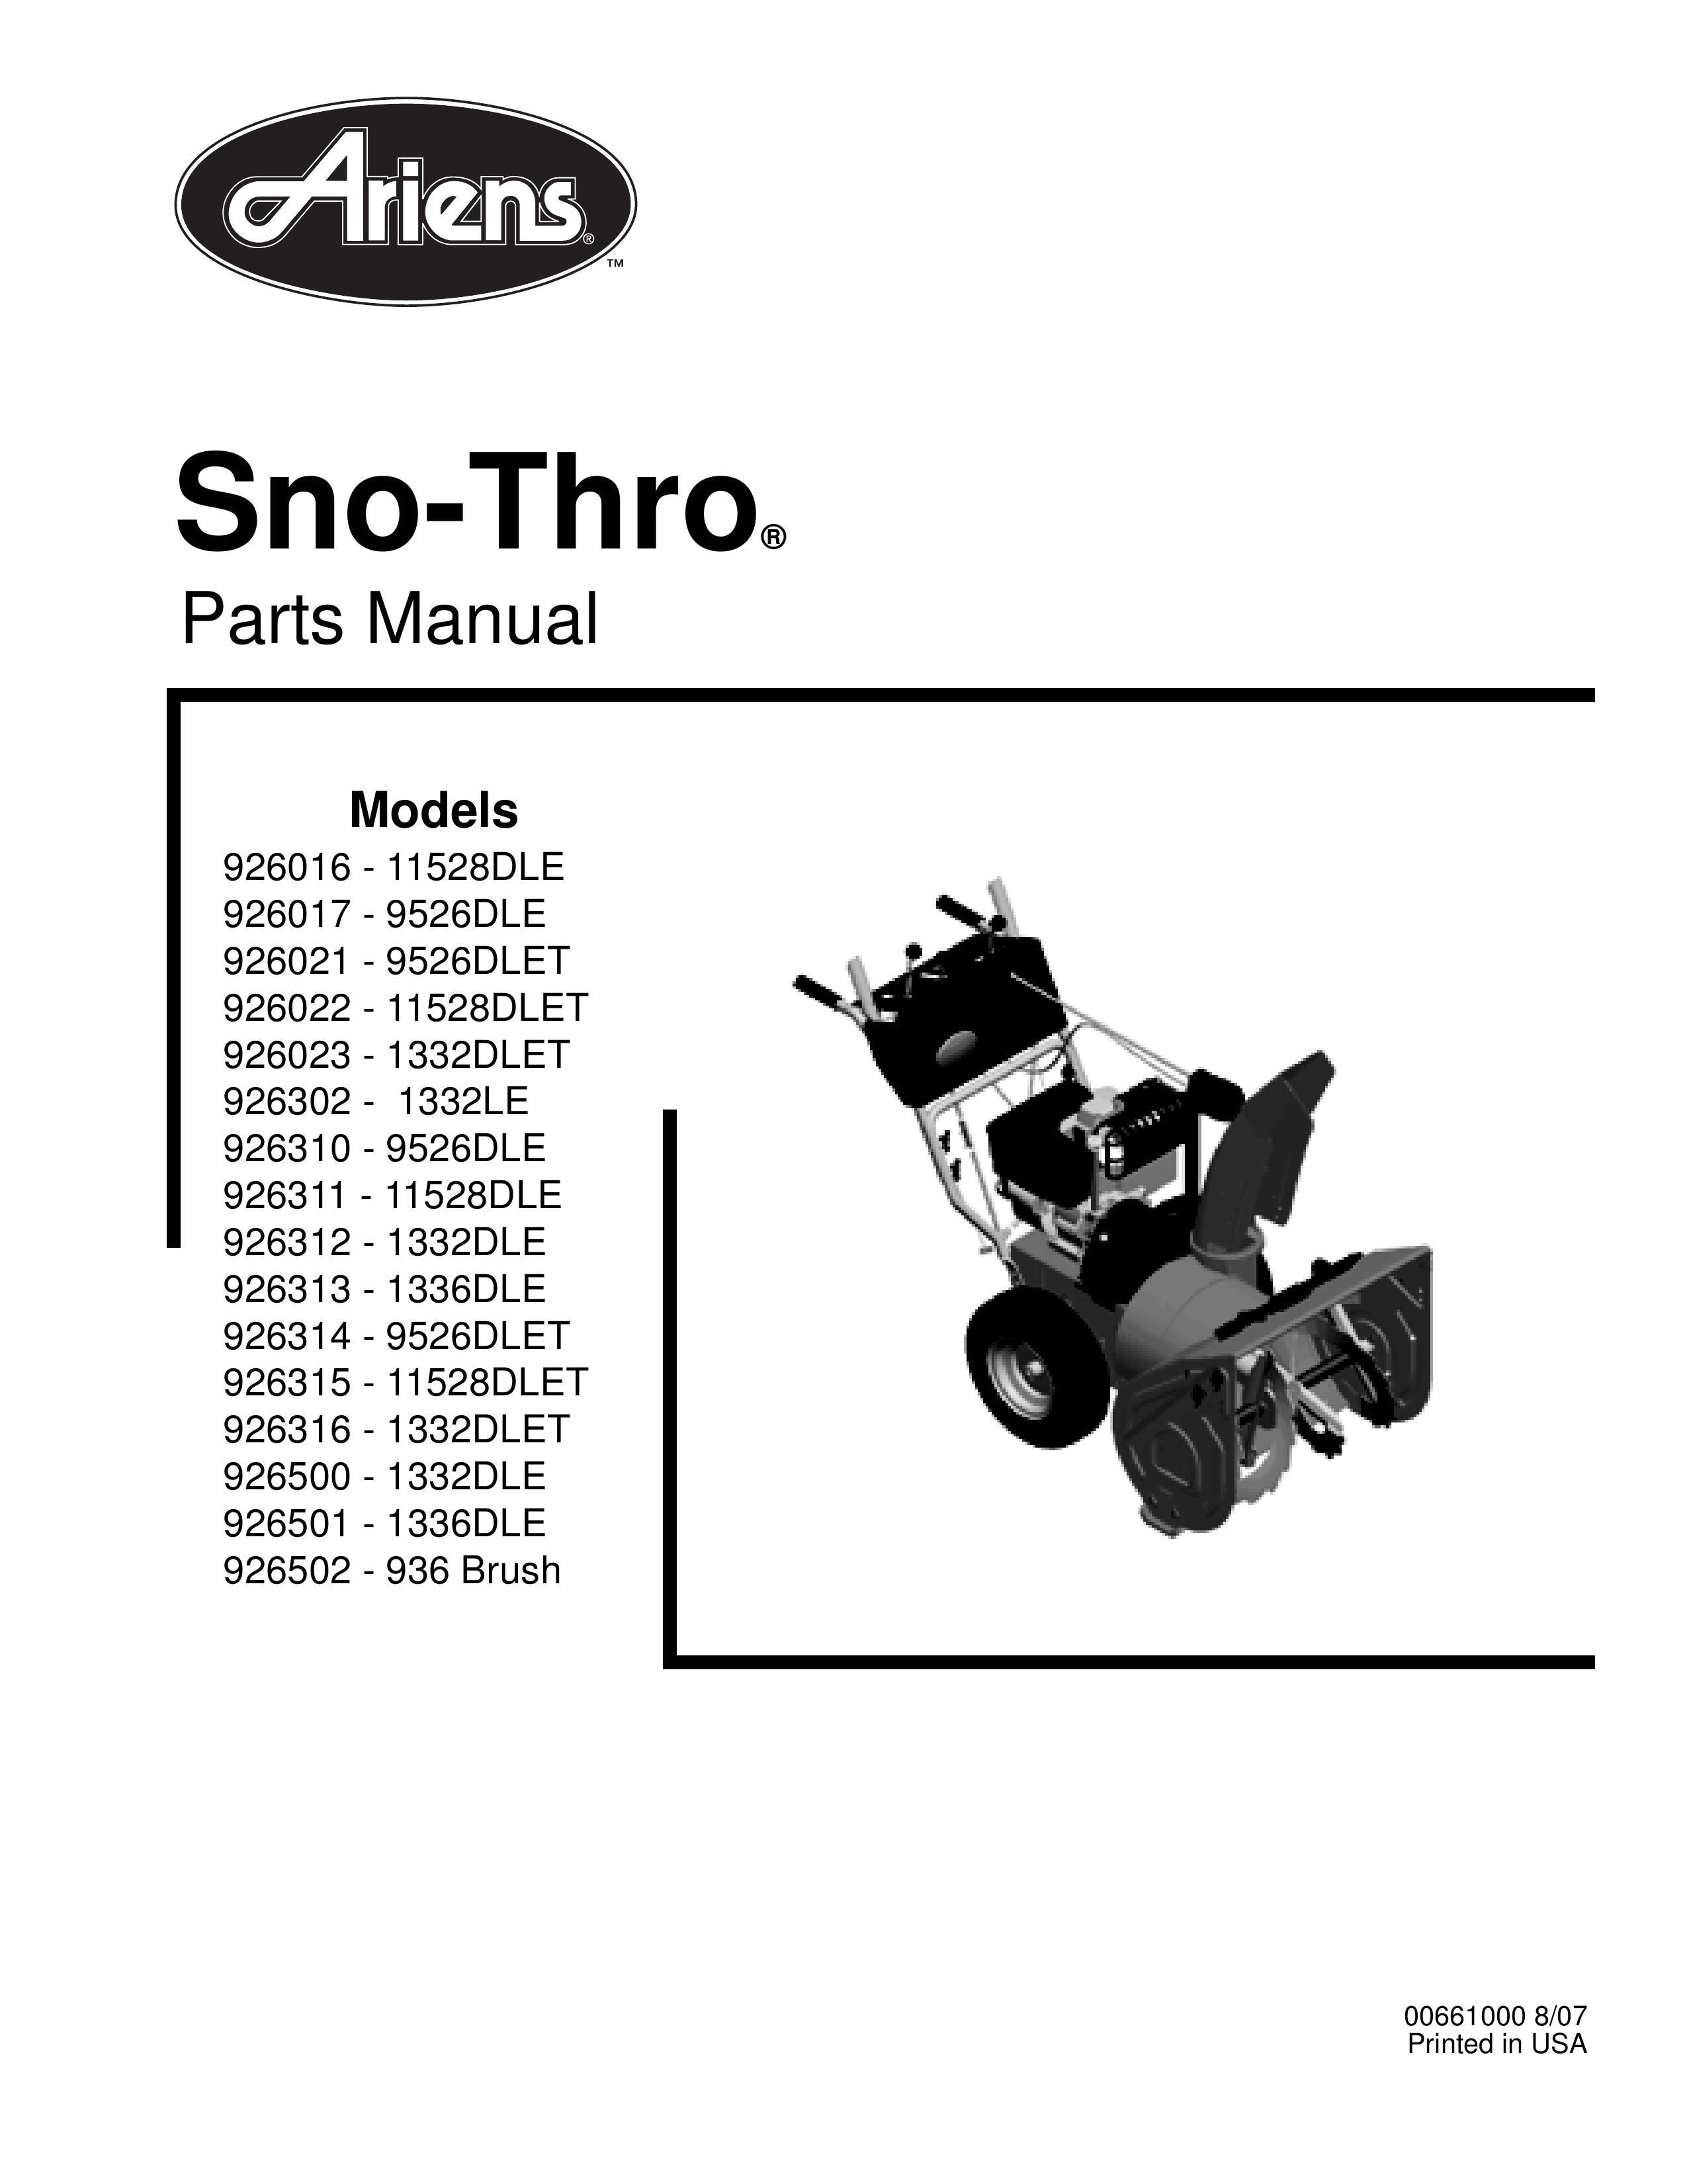 Ariens 926314 - 9526DLET Snow Blower Attachment User Manual